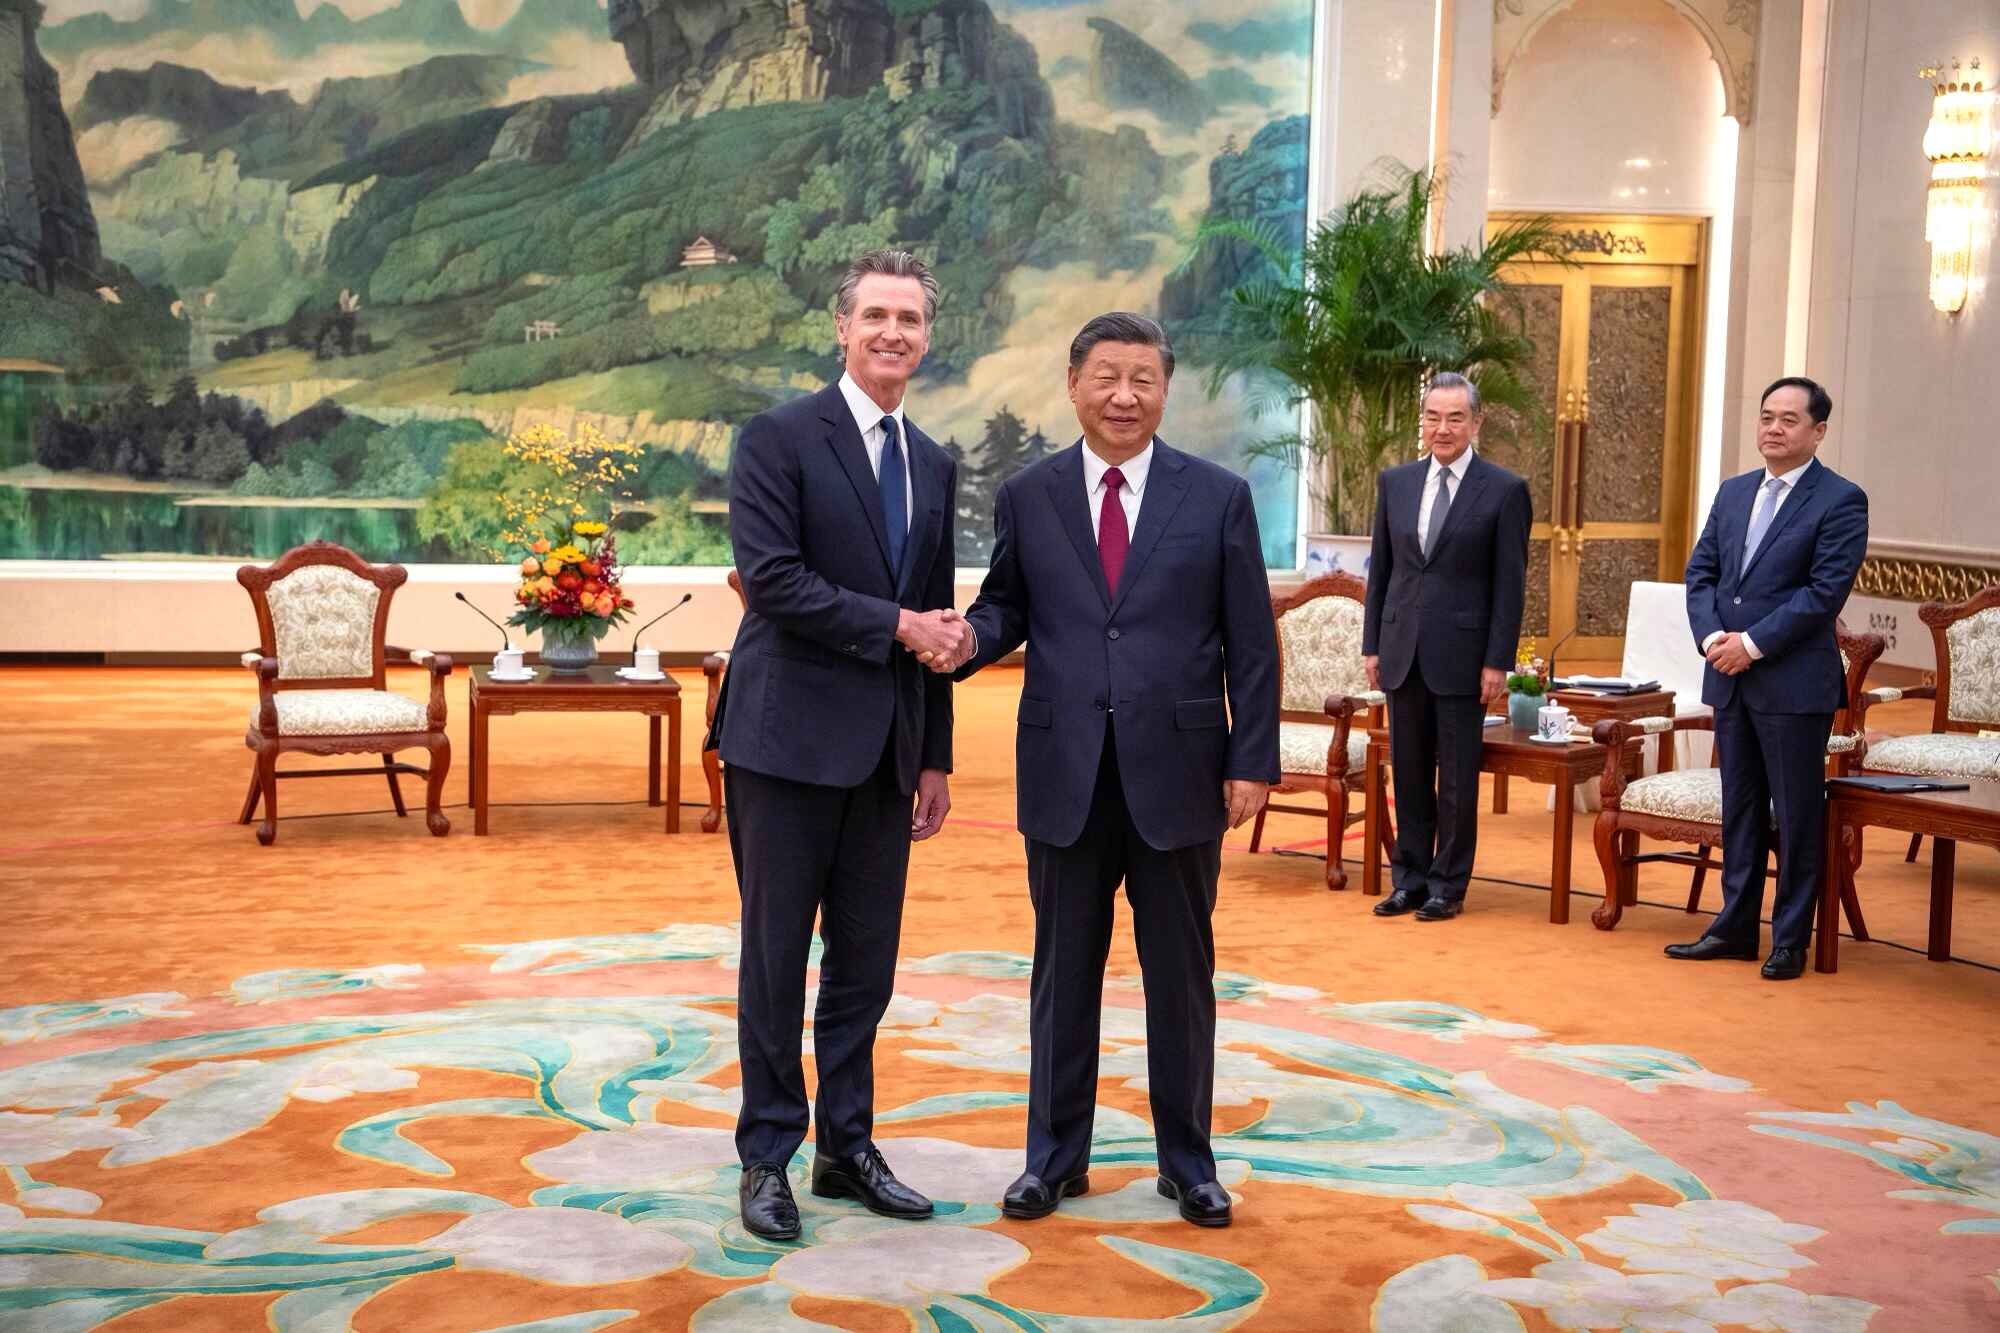 California Governor Gavin Newsom accidentally knocked over a small child while playing basketball during a diplomatic visit to China to discuss climate change. (Office of the Governor of California via AP, File)